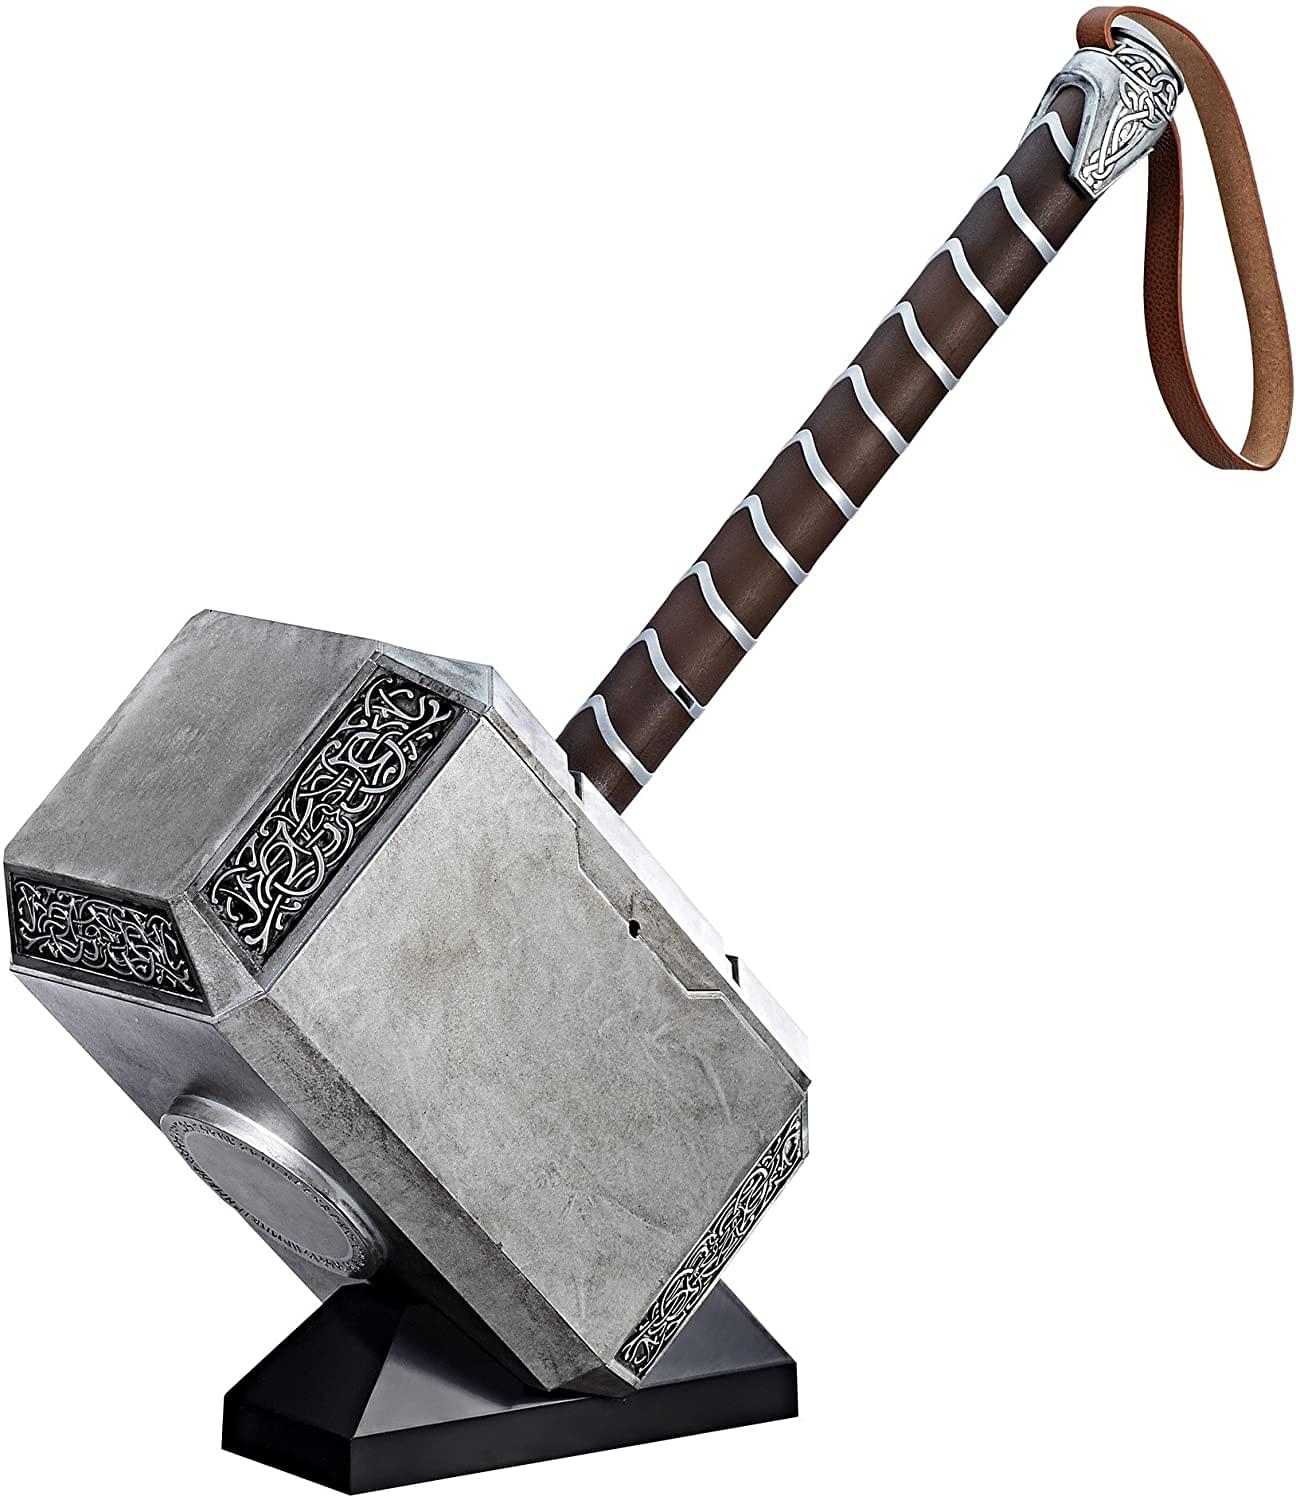 Marvel Legends Thor Mjolnir Electronic Hammer Role Play Replica